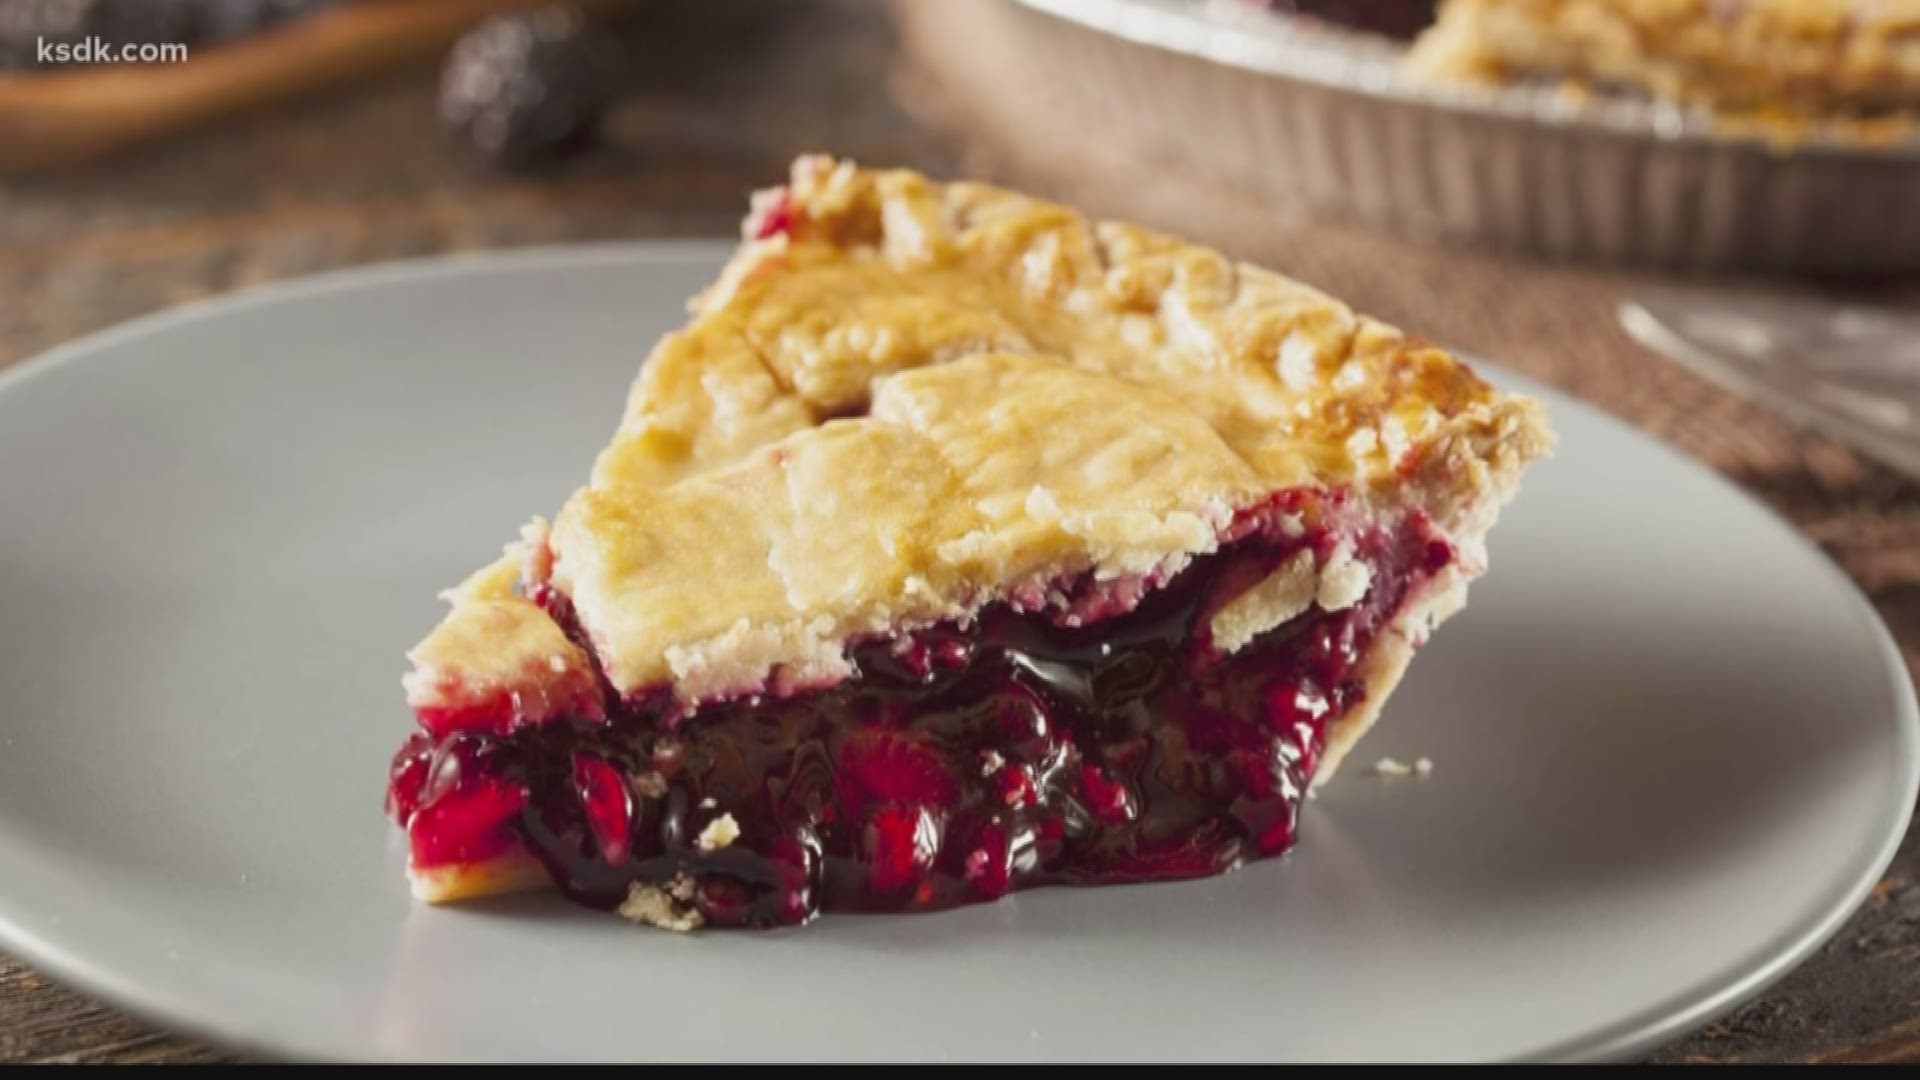 The best spots in the St. Louis area to get a pie